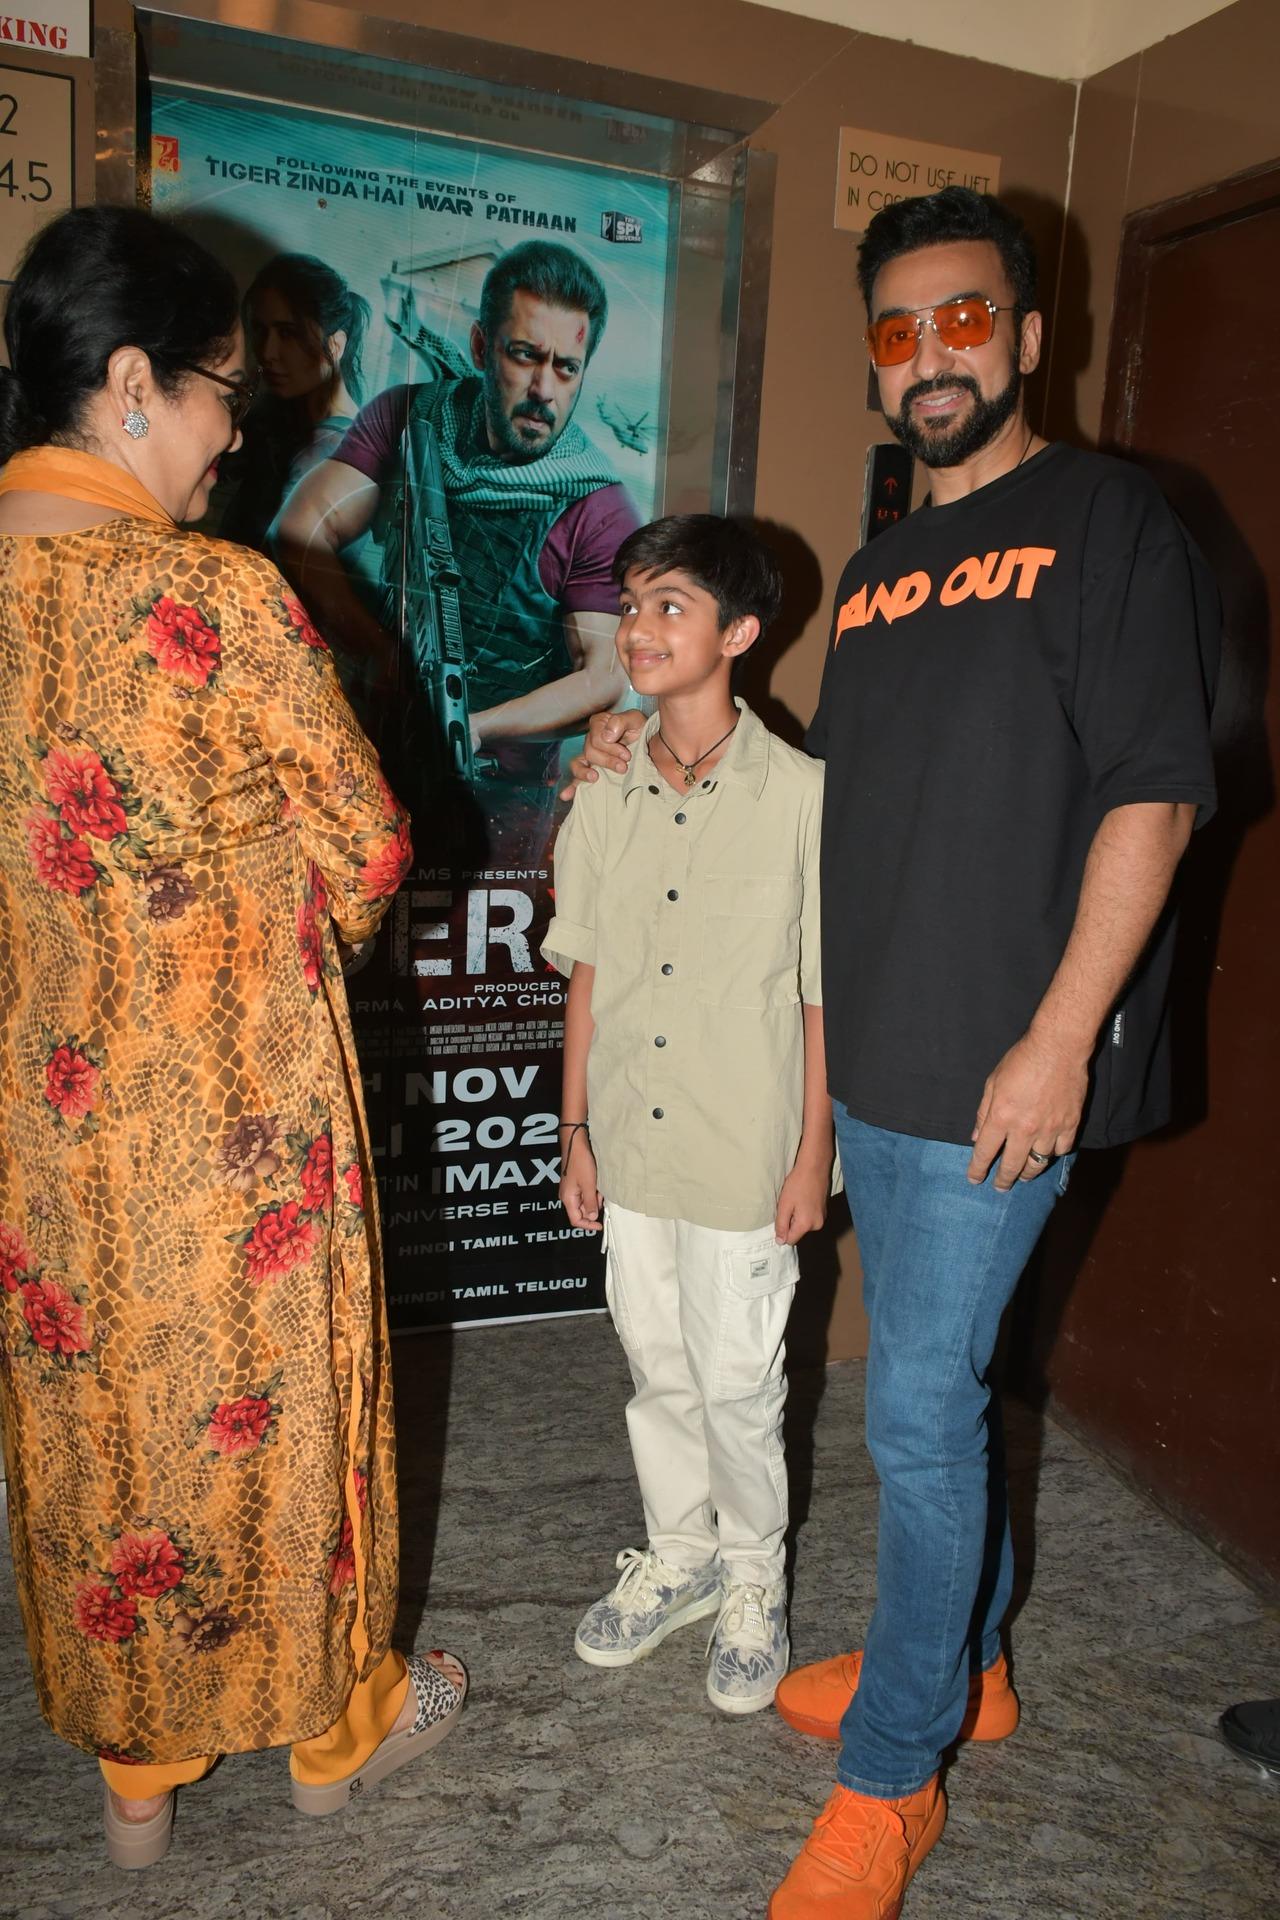 It's family time at the movies for the Kundras as they step out to watch Tiger 3